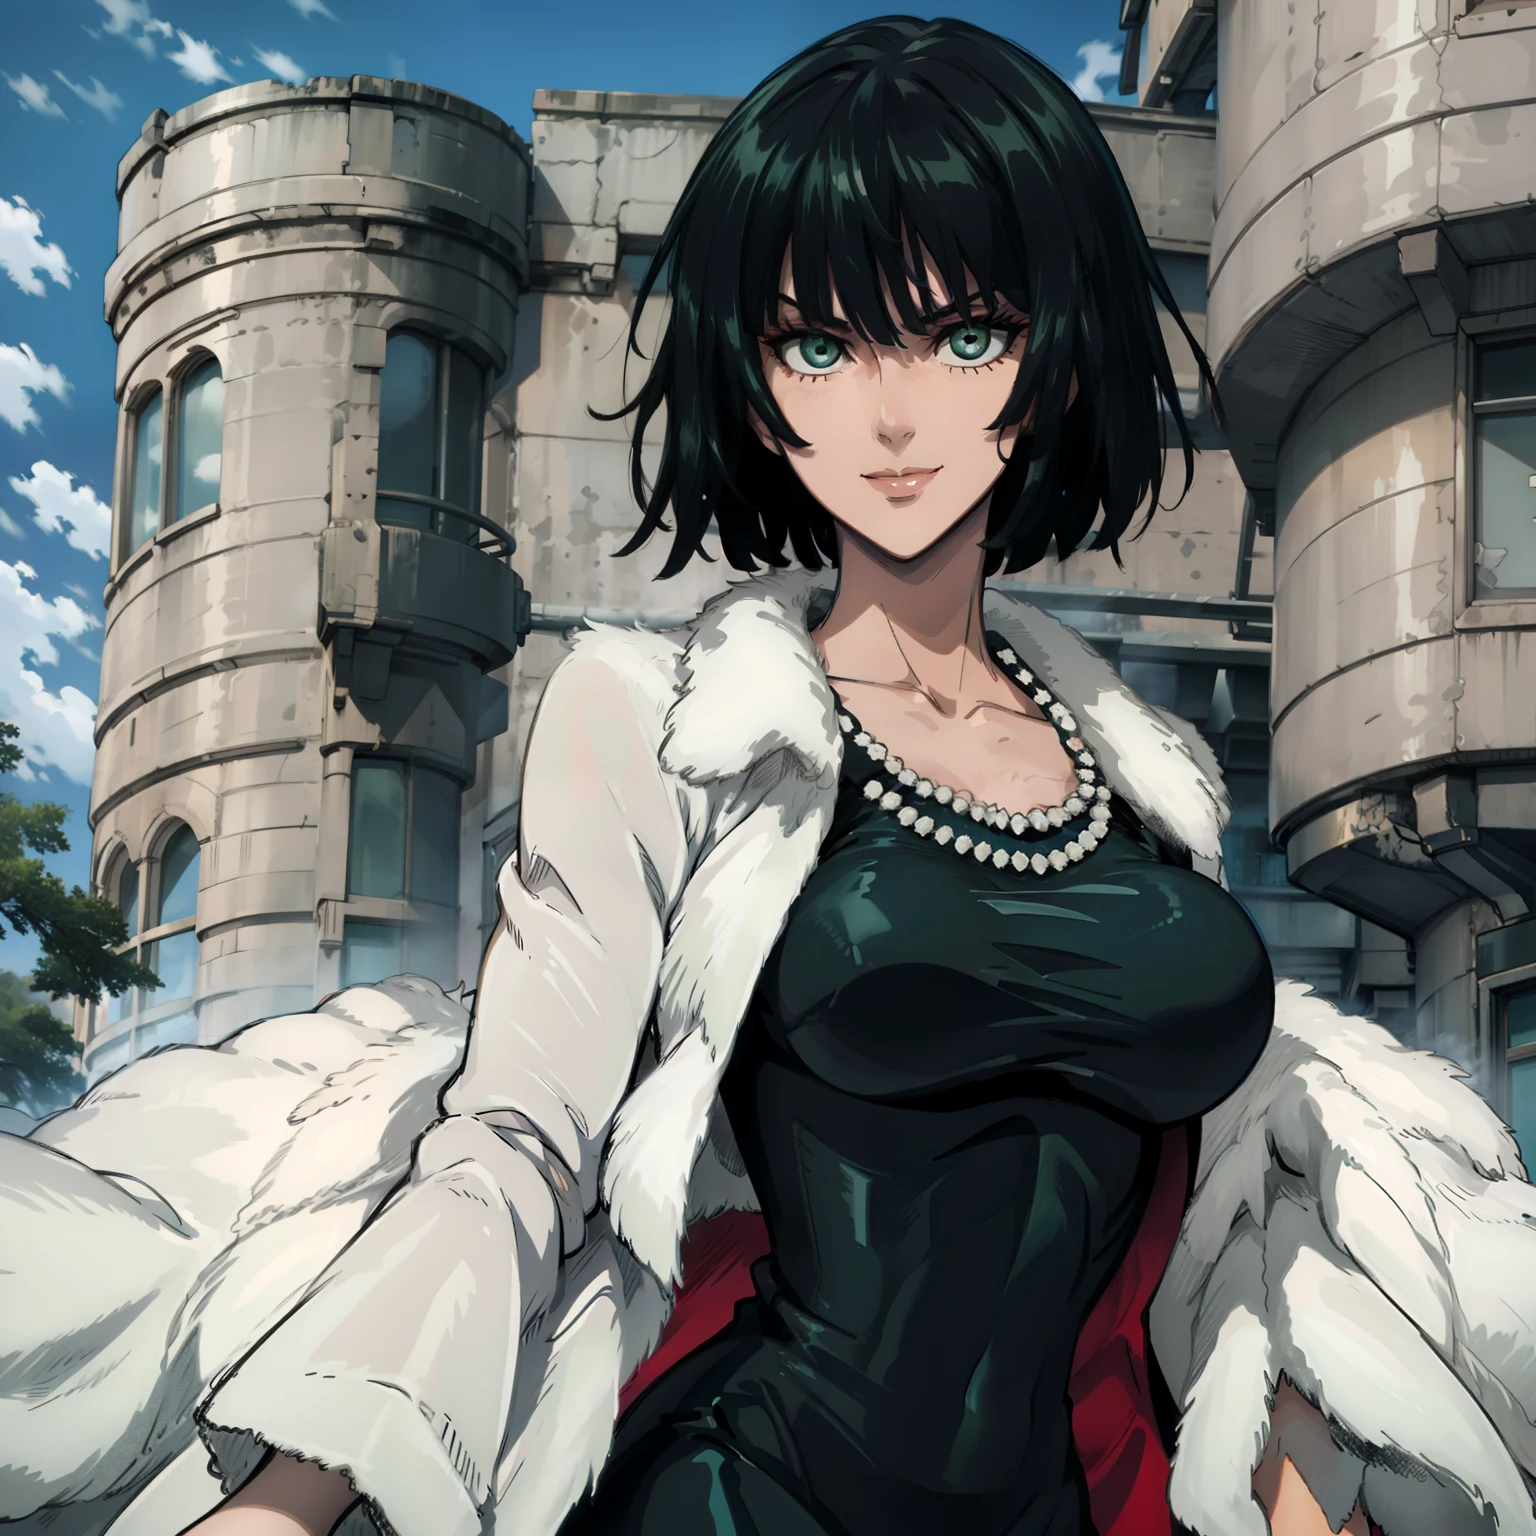 female with green fringe style bob haircut, wearing white fur lined robe, wearing v-neck black dress with high collar, wearing pearl necklaces, dominant pose, seductive smile, alone, solo, alone, (SOLO)(ALONE)